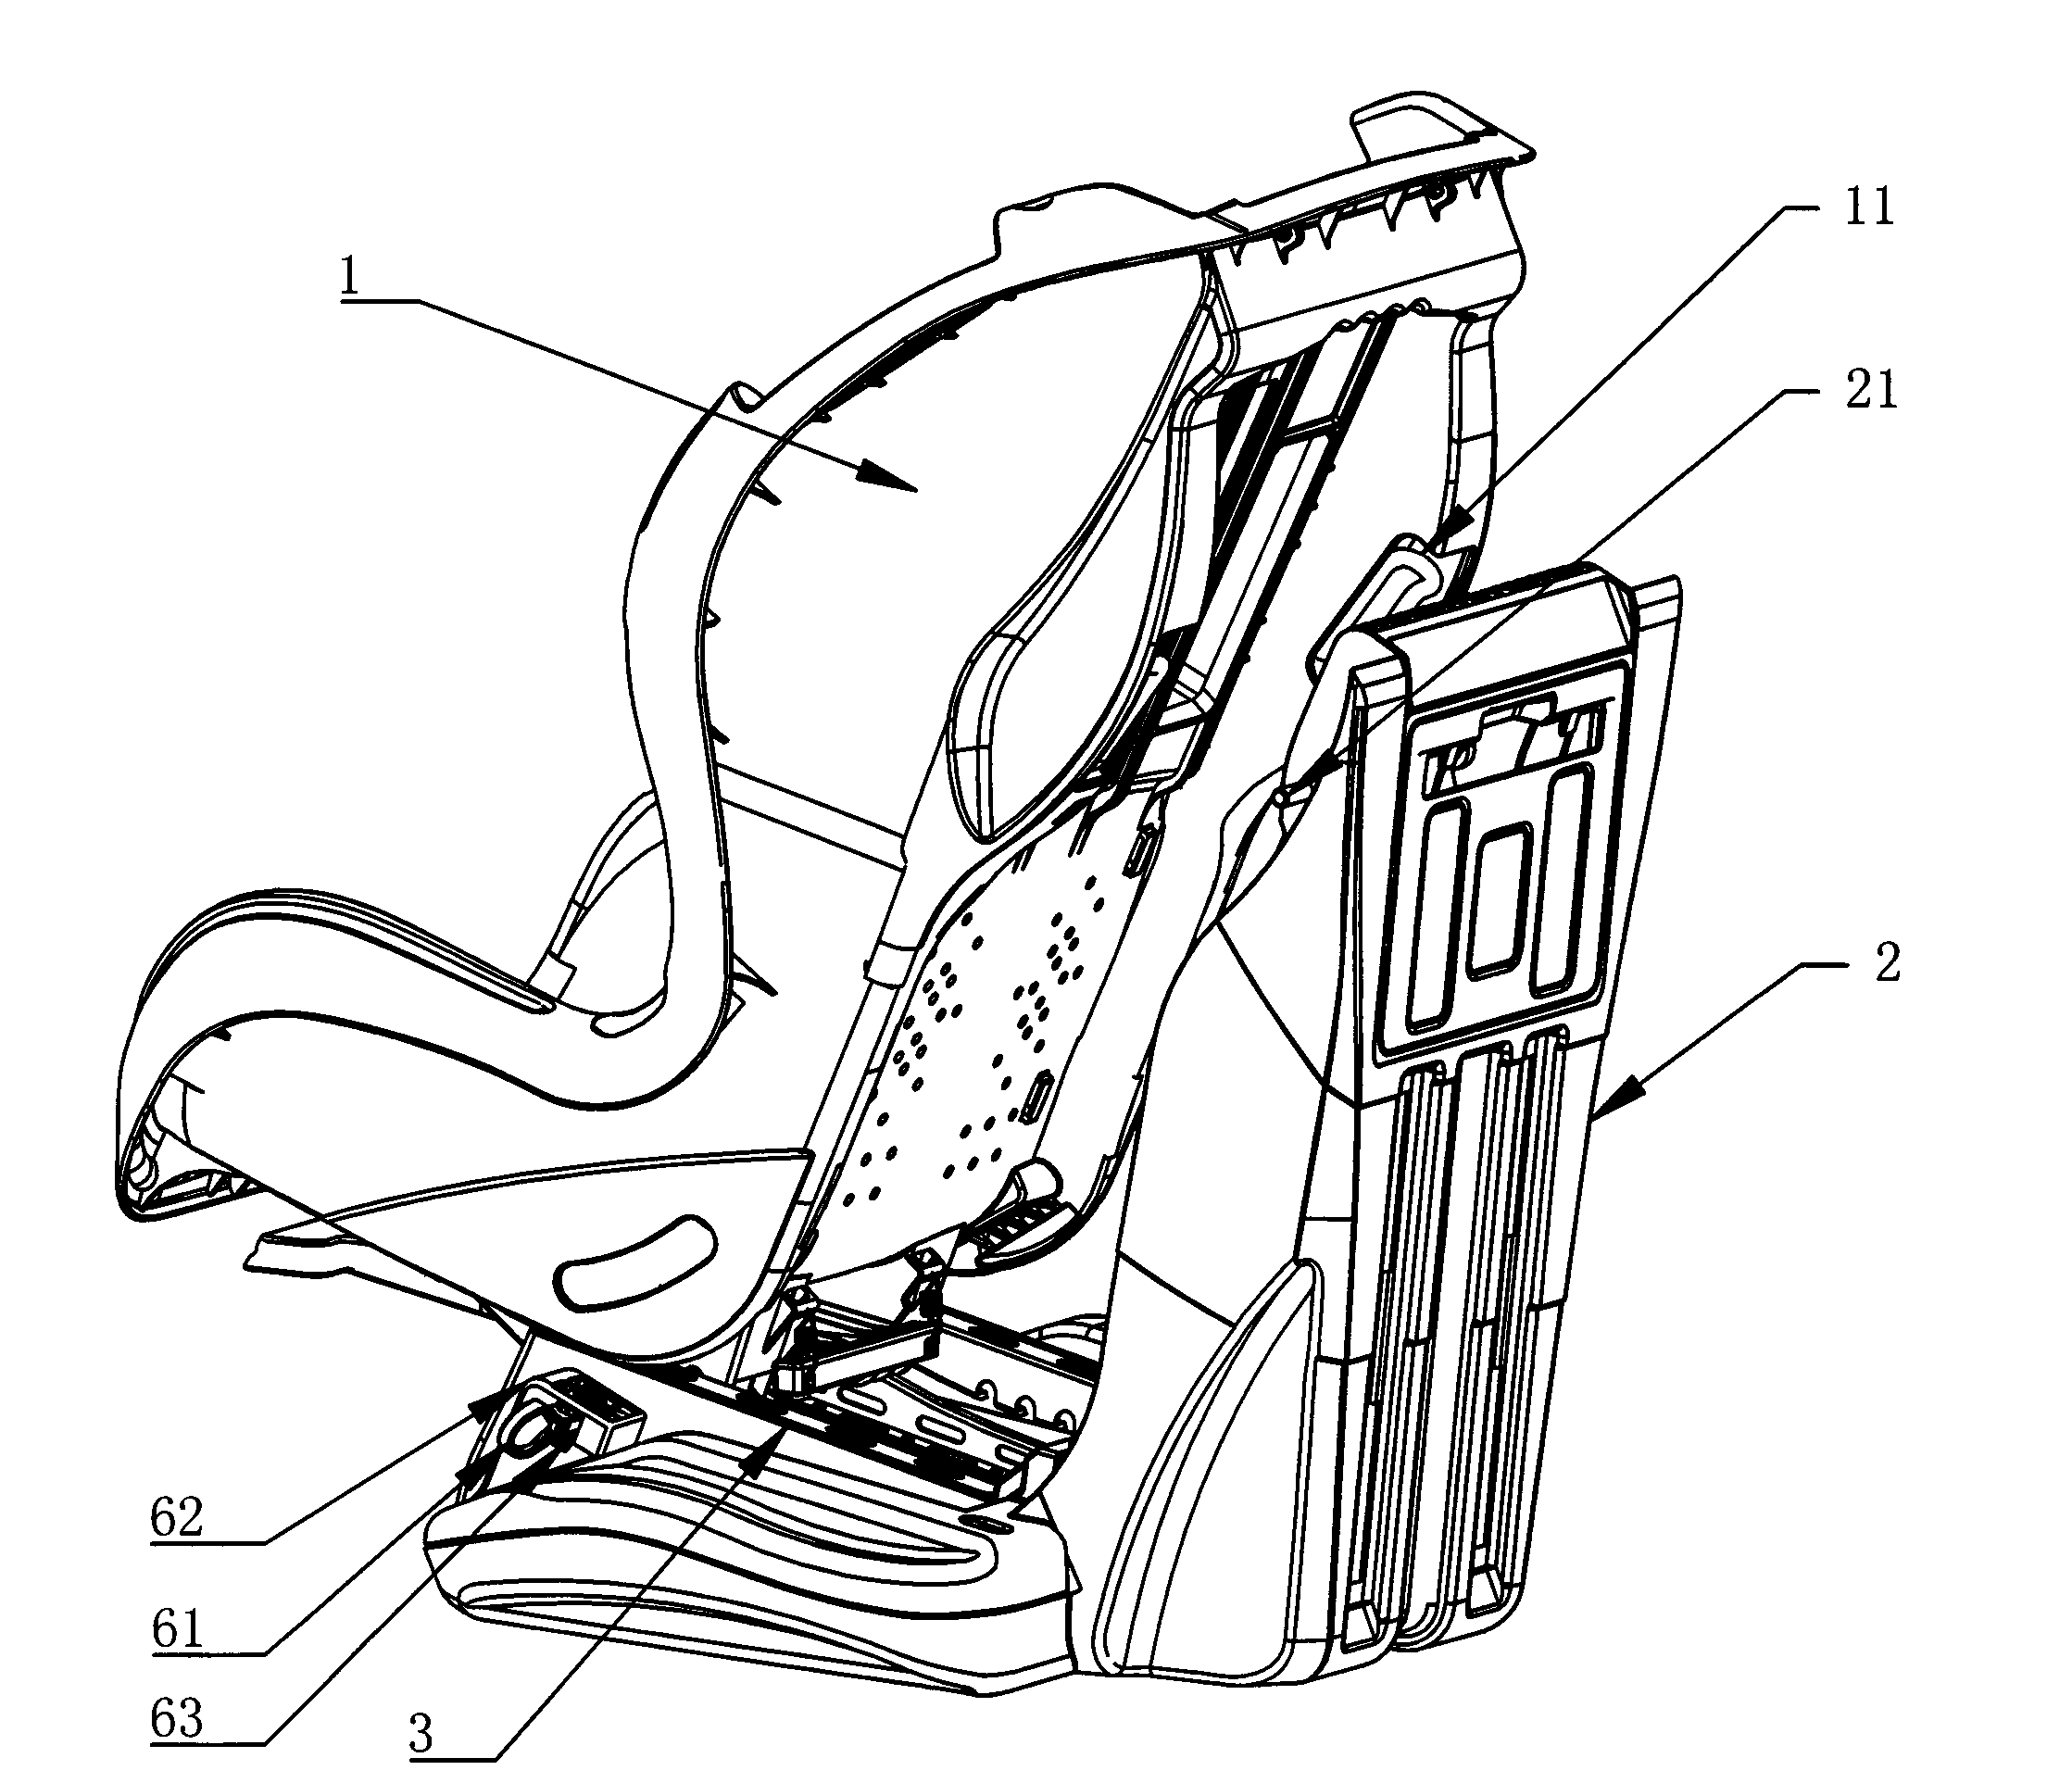 Connecting structure of safety chair for children